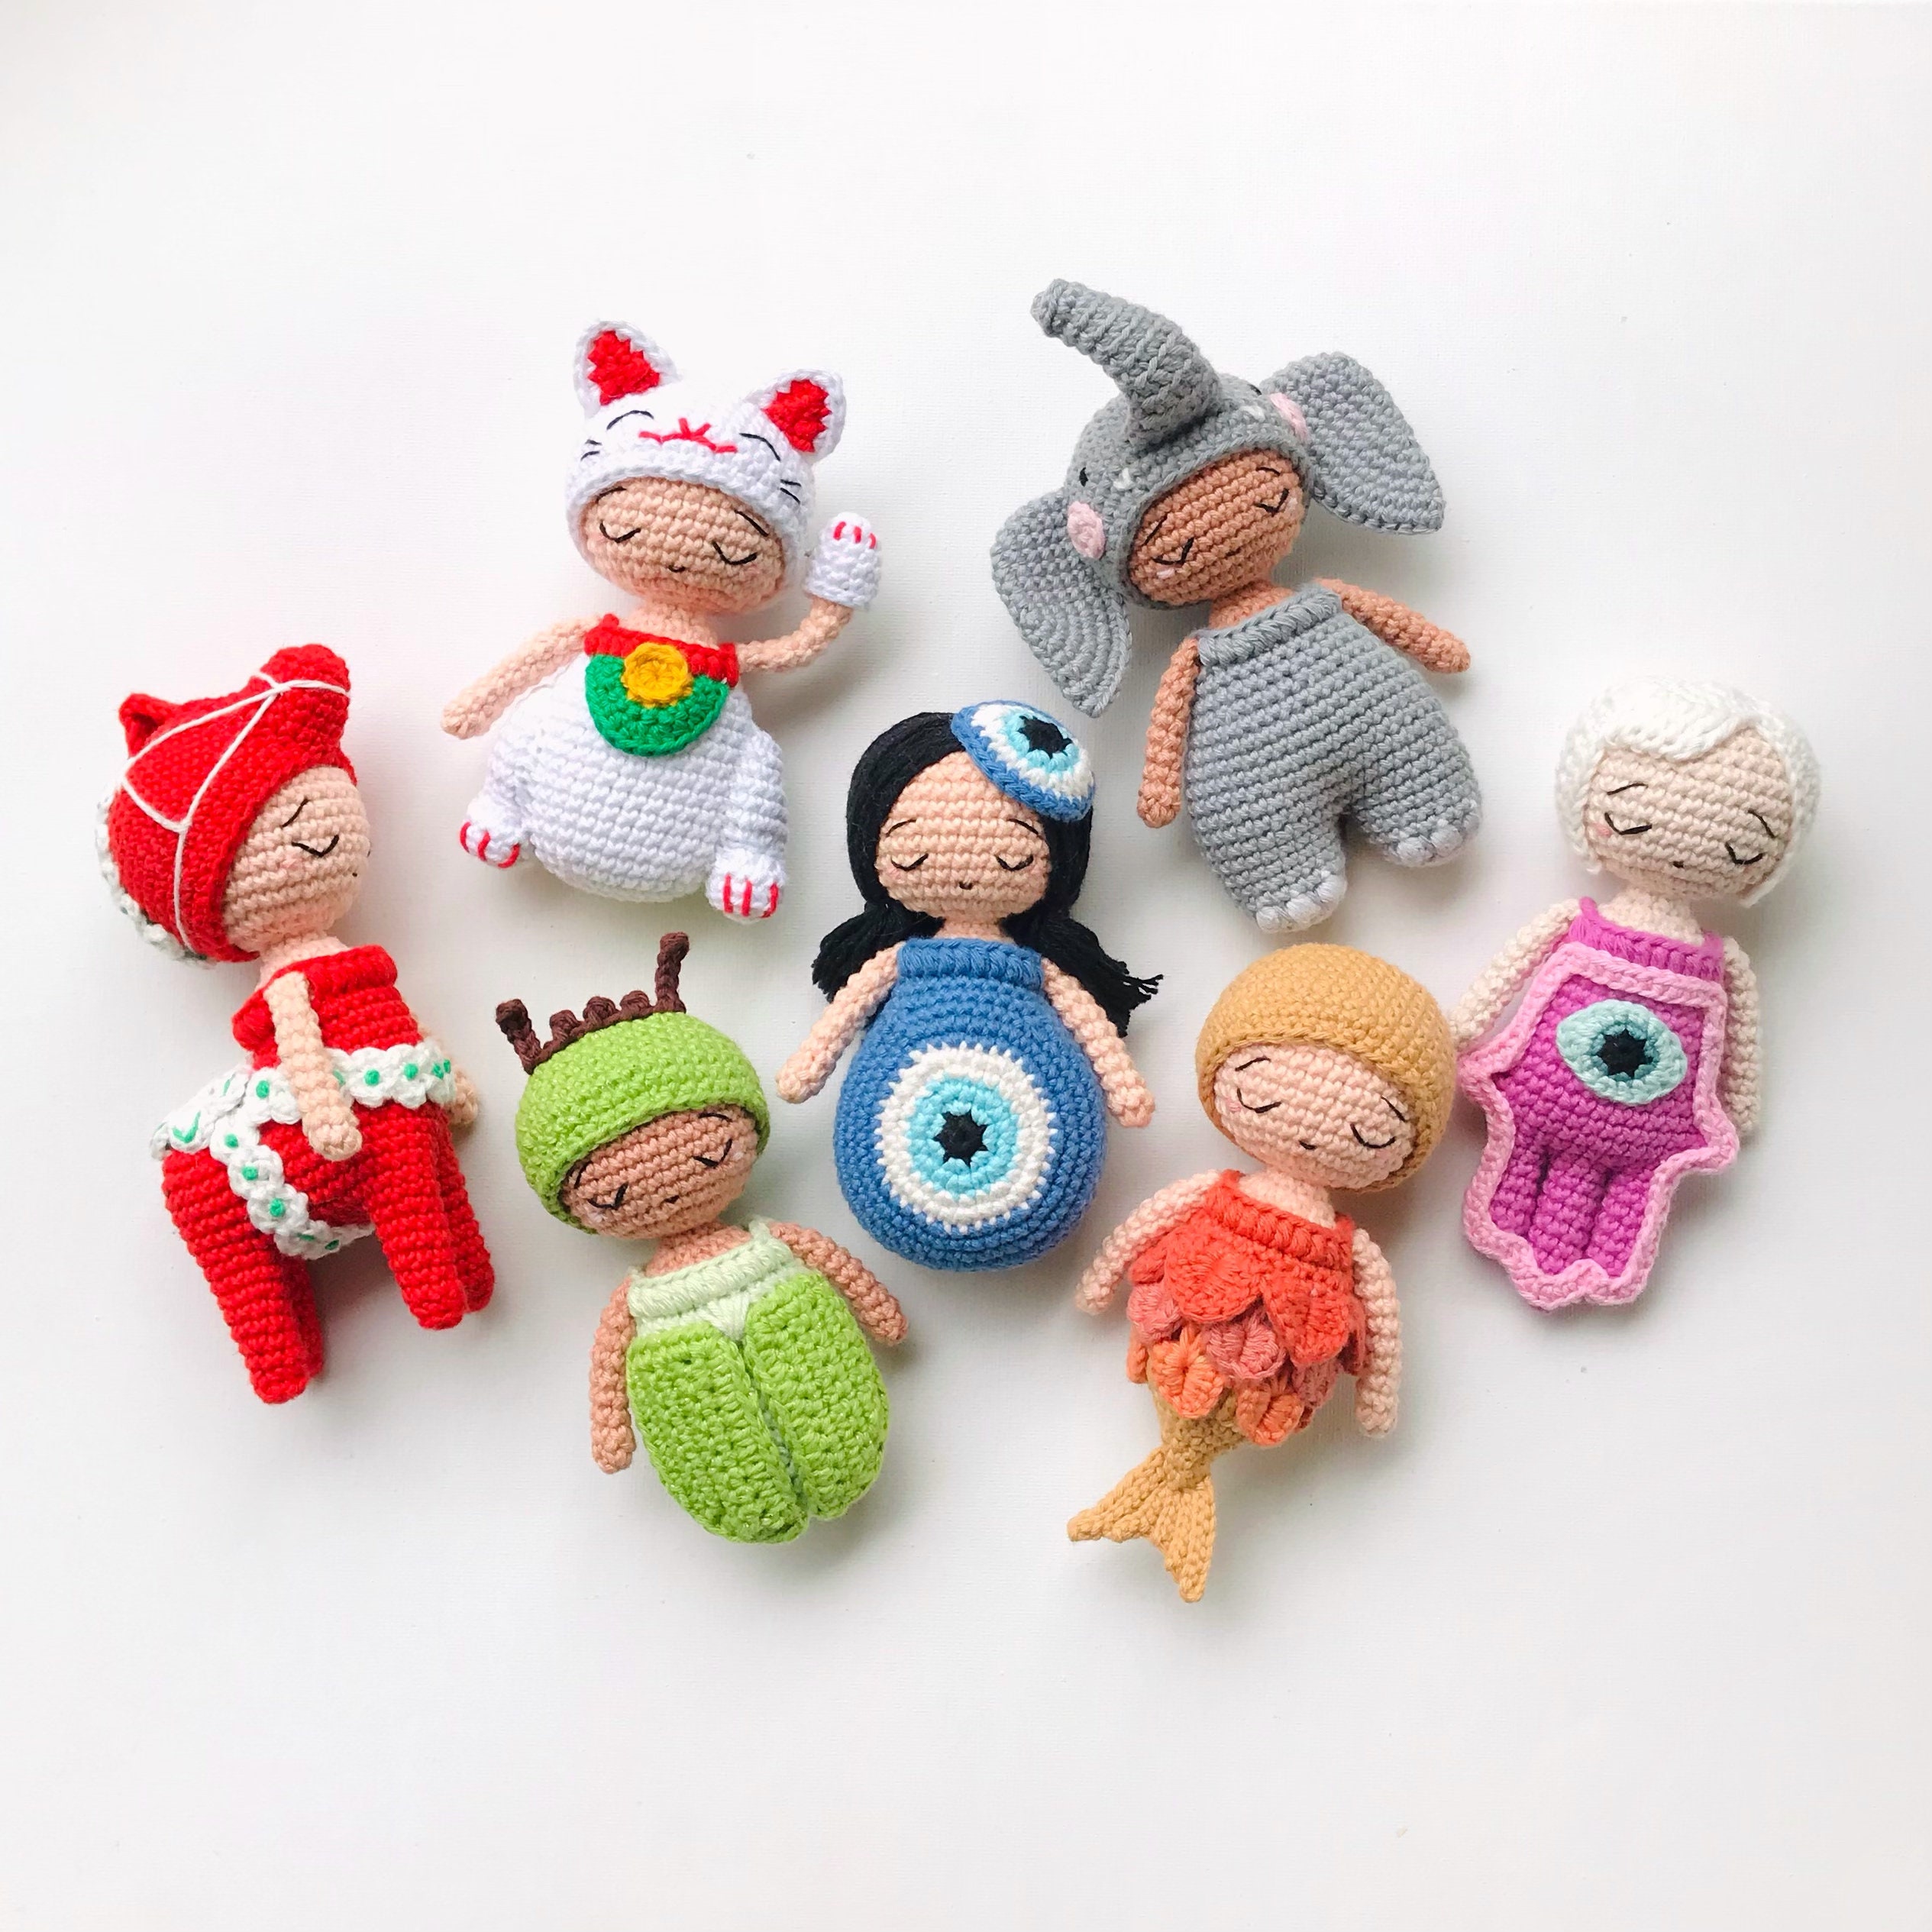 EconoCrafts: Worry Doll Group Pack